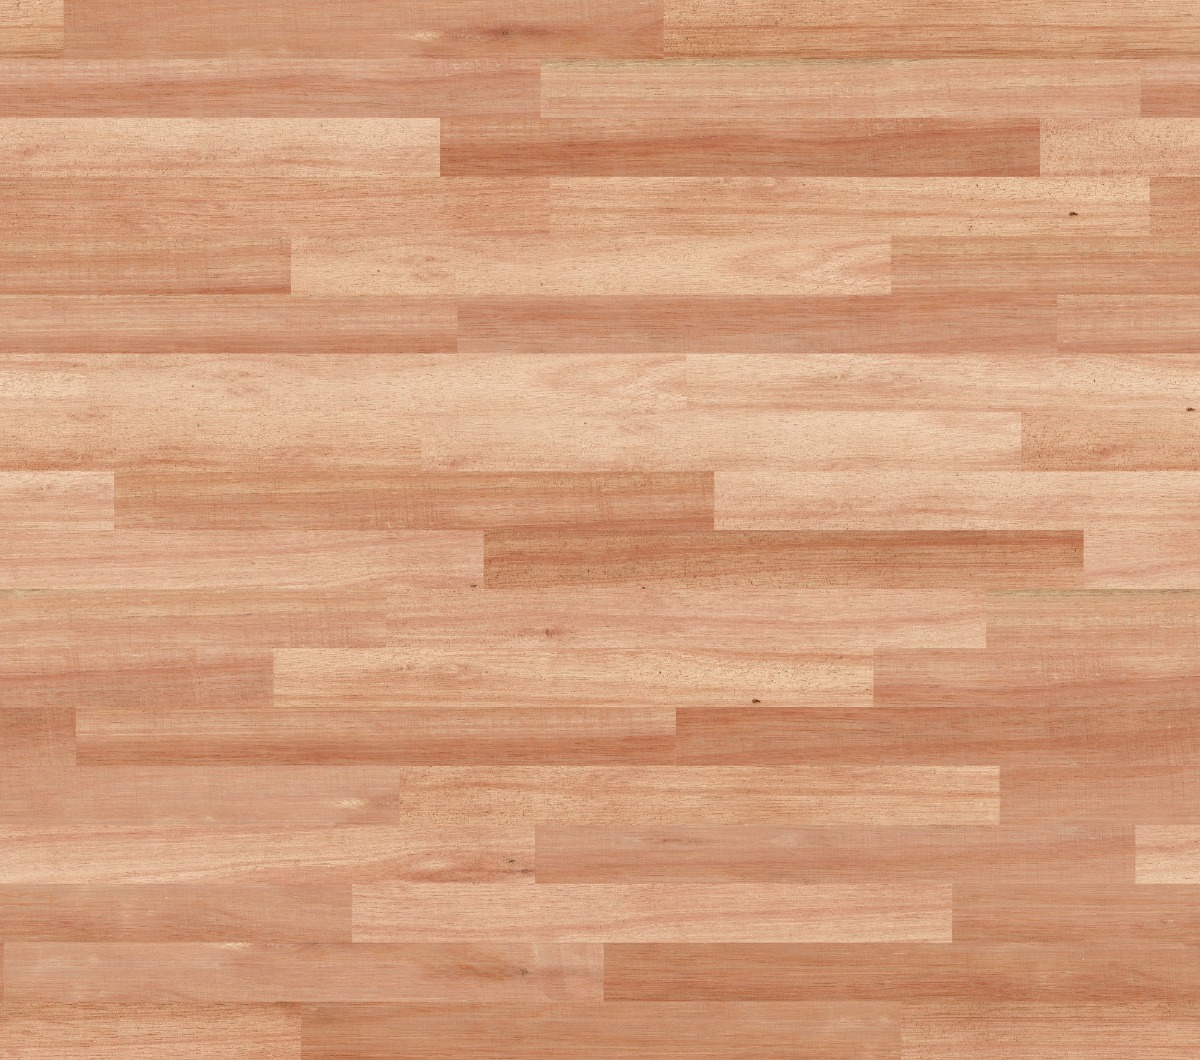 A seamless wood texture with eucalyptus boards arranged in a Staggered pattern